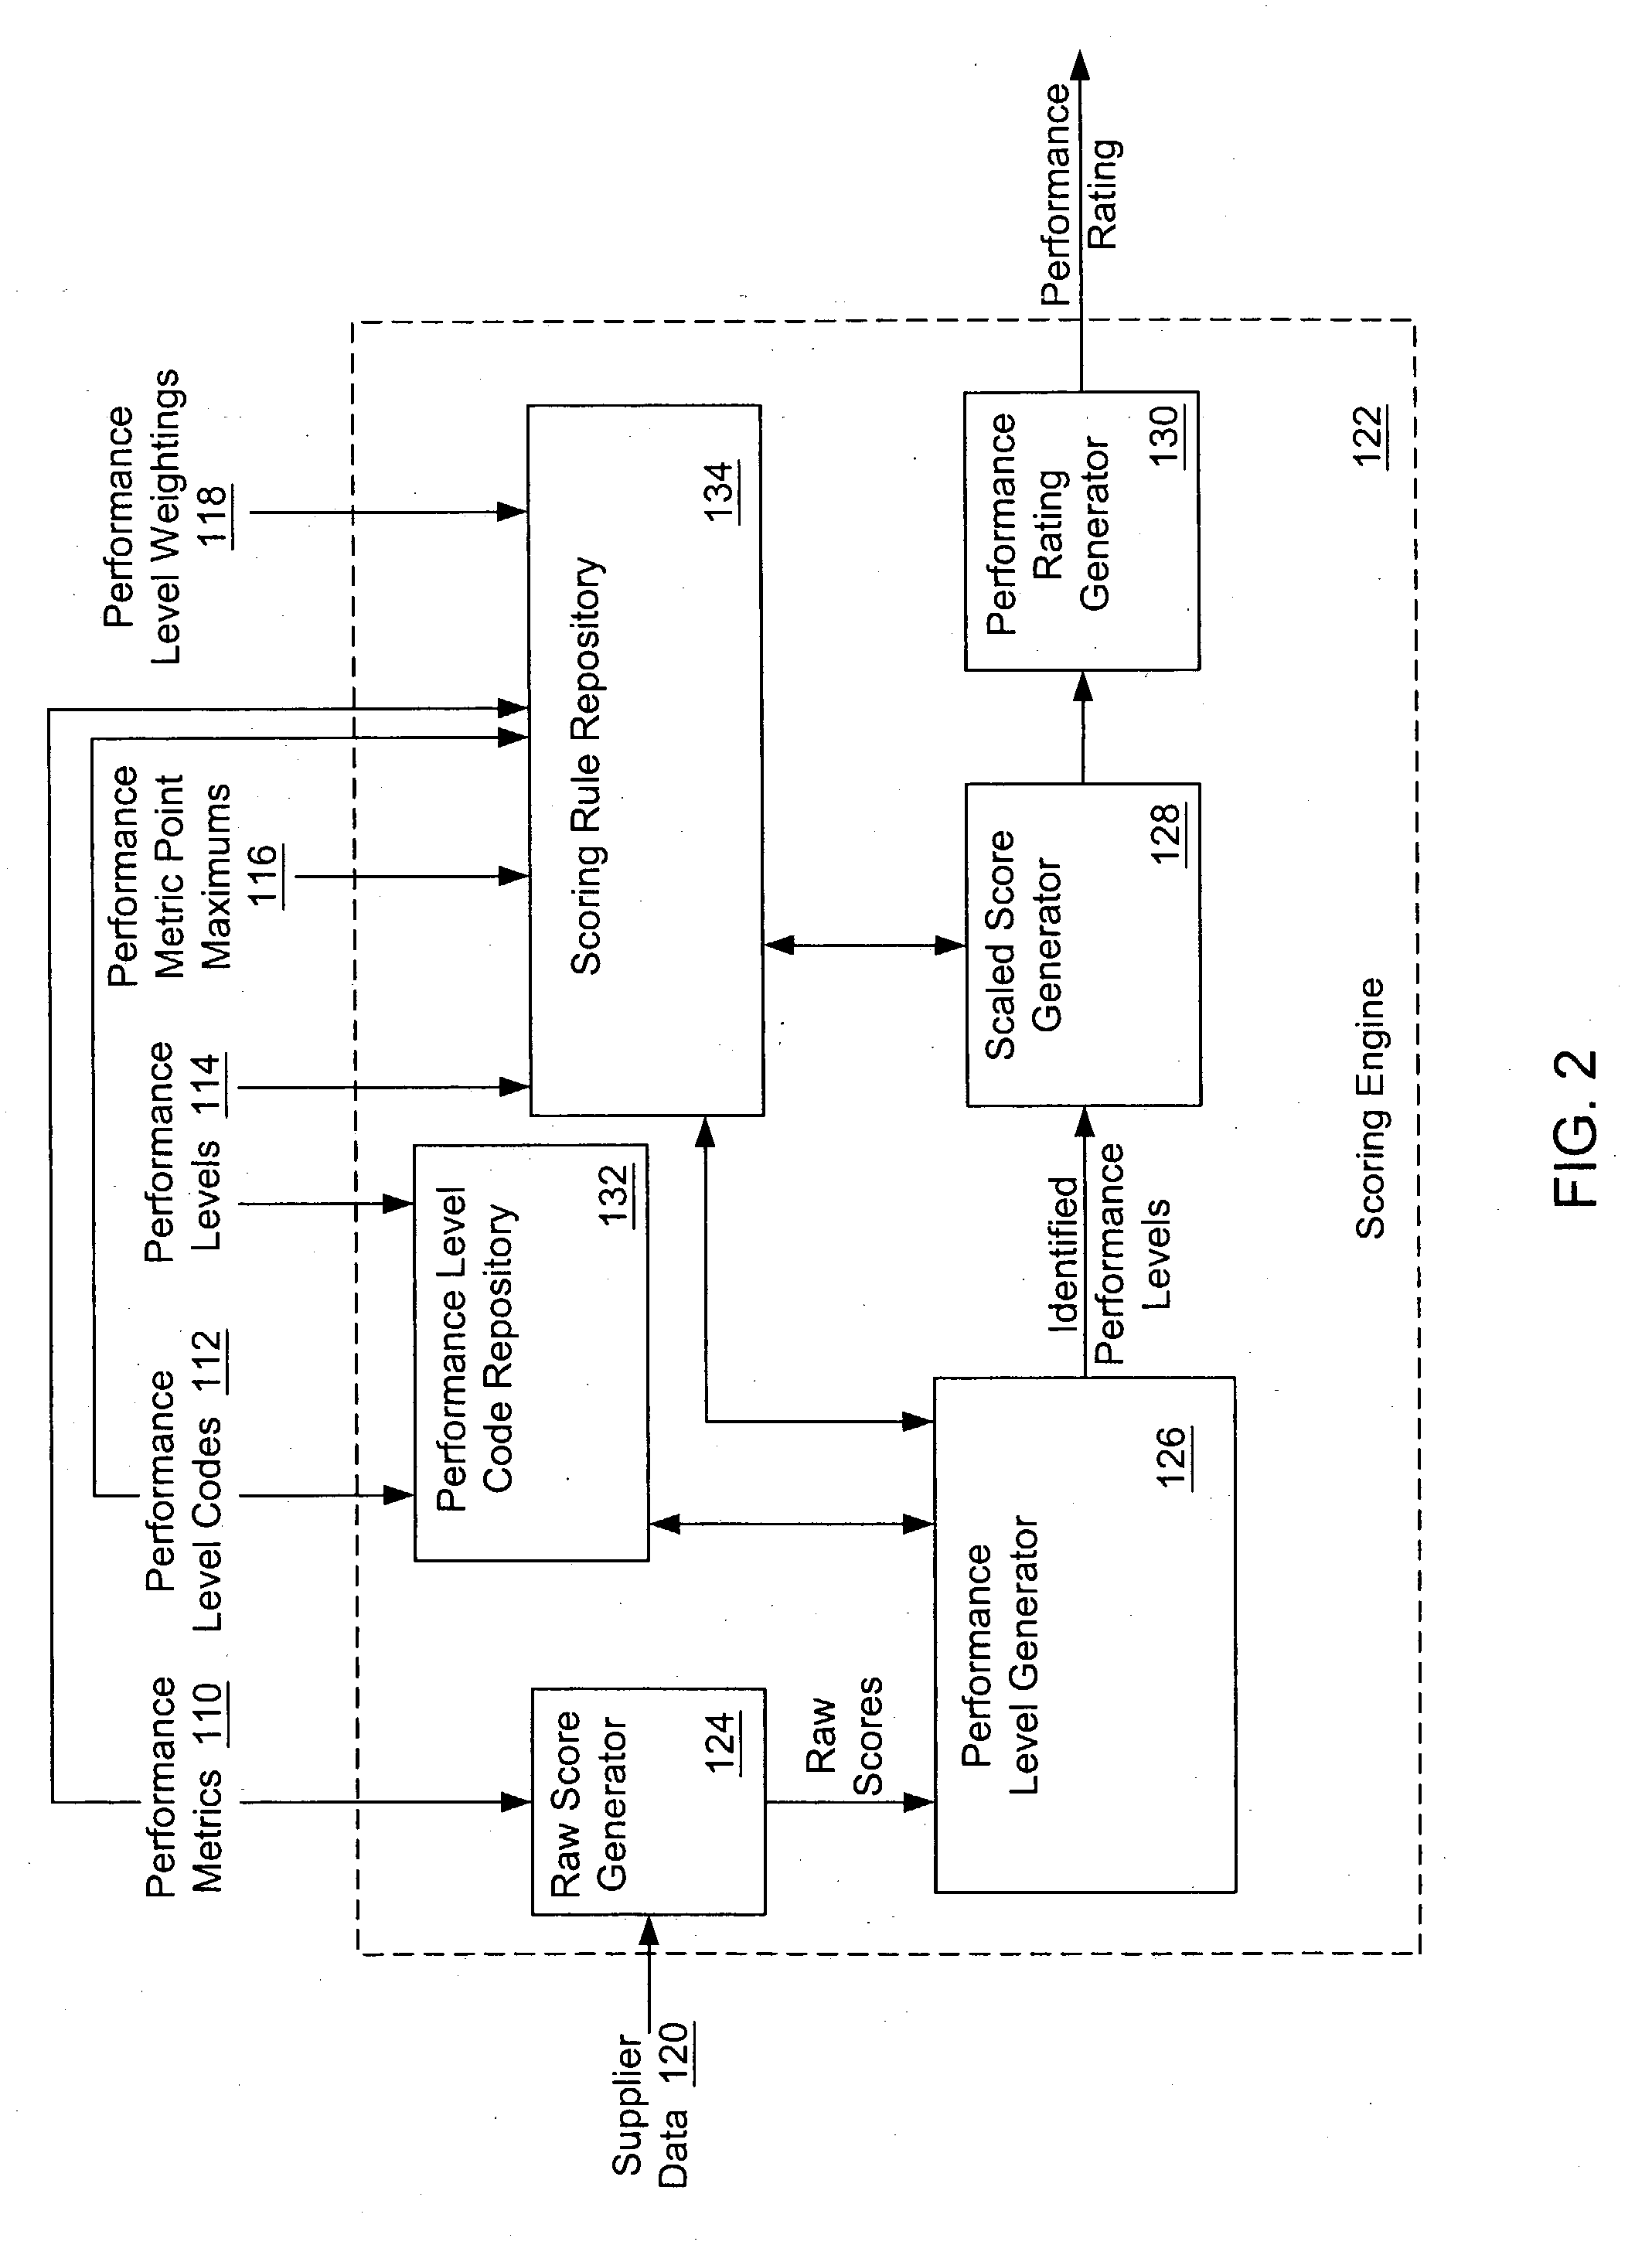 System and method for configuring scoring rules and generating supplier performance ratings